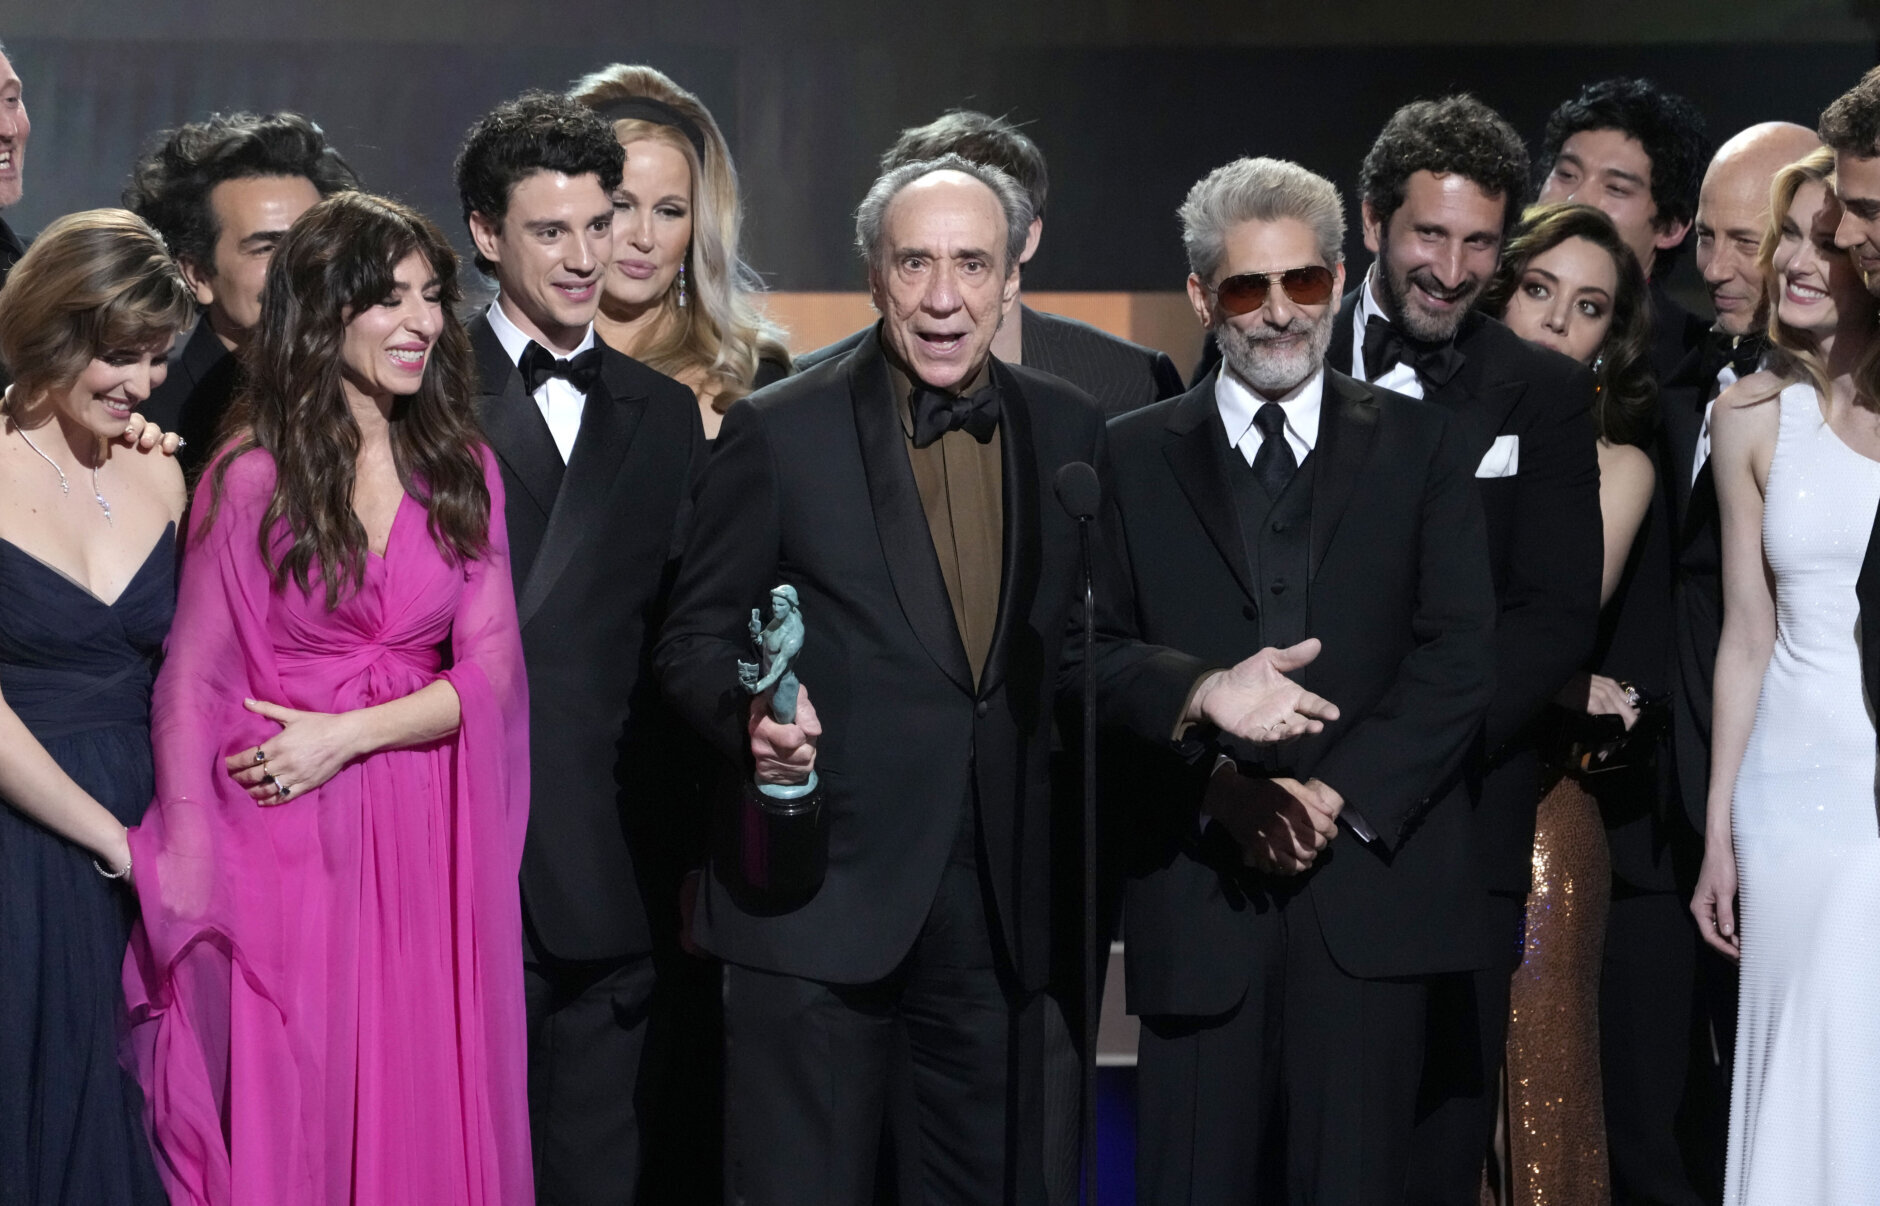 F. Murray Abraham, center, and the cast of "The White Lotus," accept the award for outstanding performance by an ensemble in a drama series at the 29th annual Screen Actors Guild Awards on Sunday, Feb. 26, 2023, at the Fairmont Century Plaza in Los Angeles. (AP Photo/Chris Pizzello)